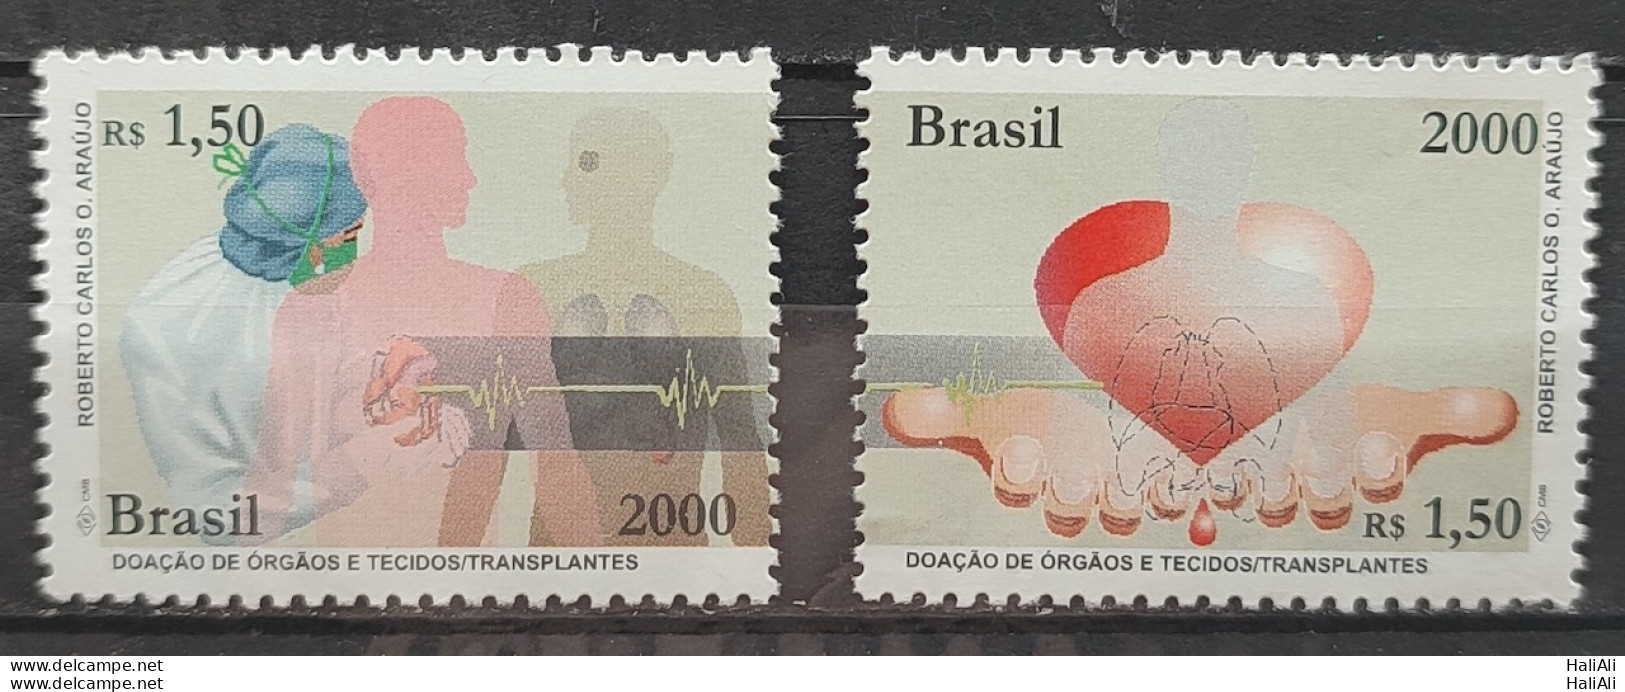 C 2341 Brazil Stamp Donation Of Organ And Tissues Science Health 2000 Complete Series Separate - Unused Stamps